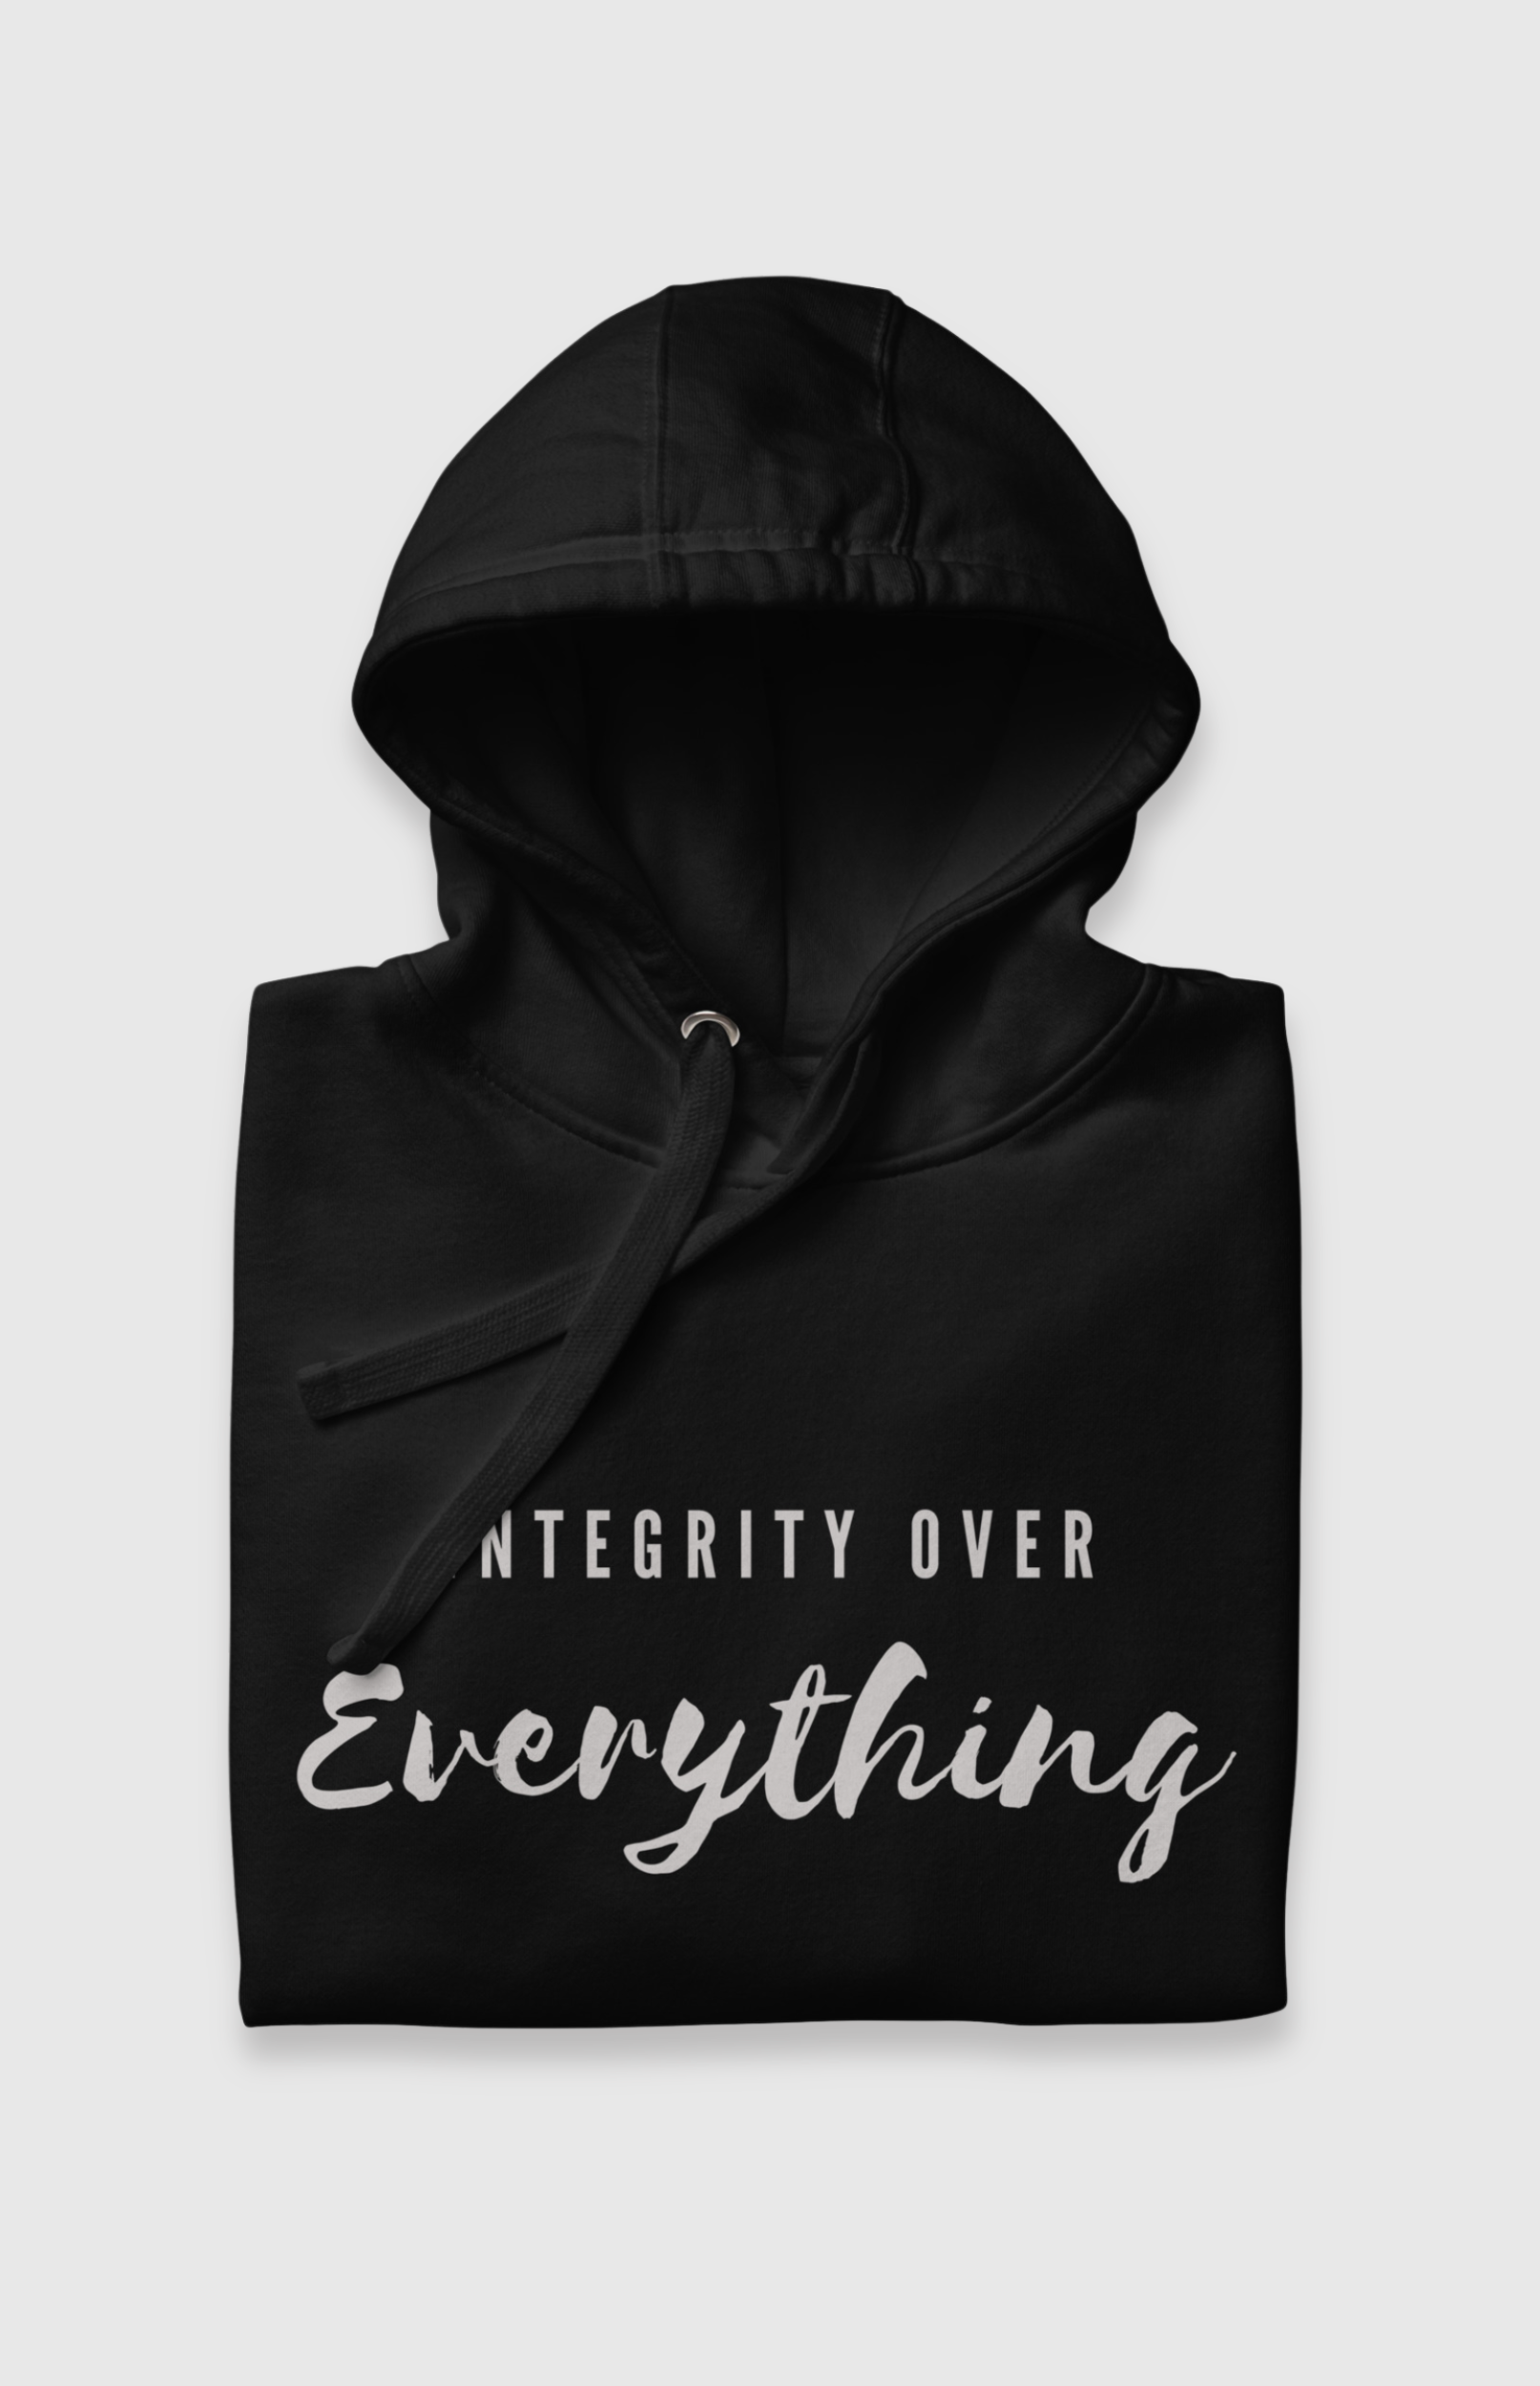 Integrity over Everything Hoodie